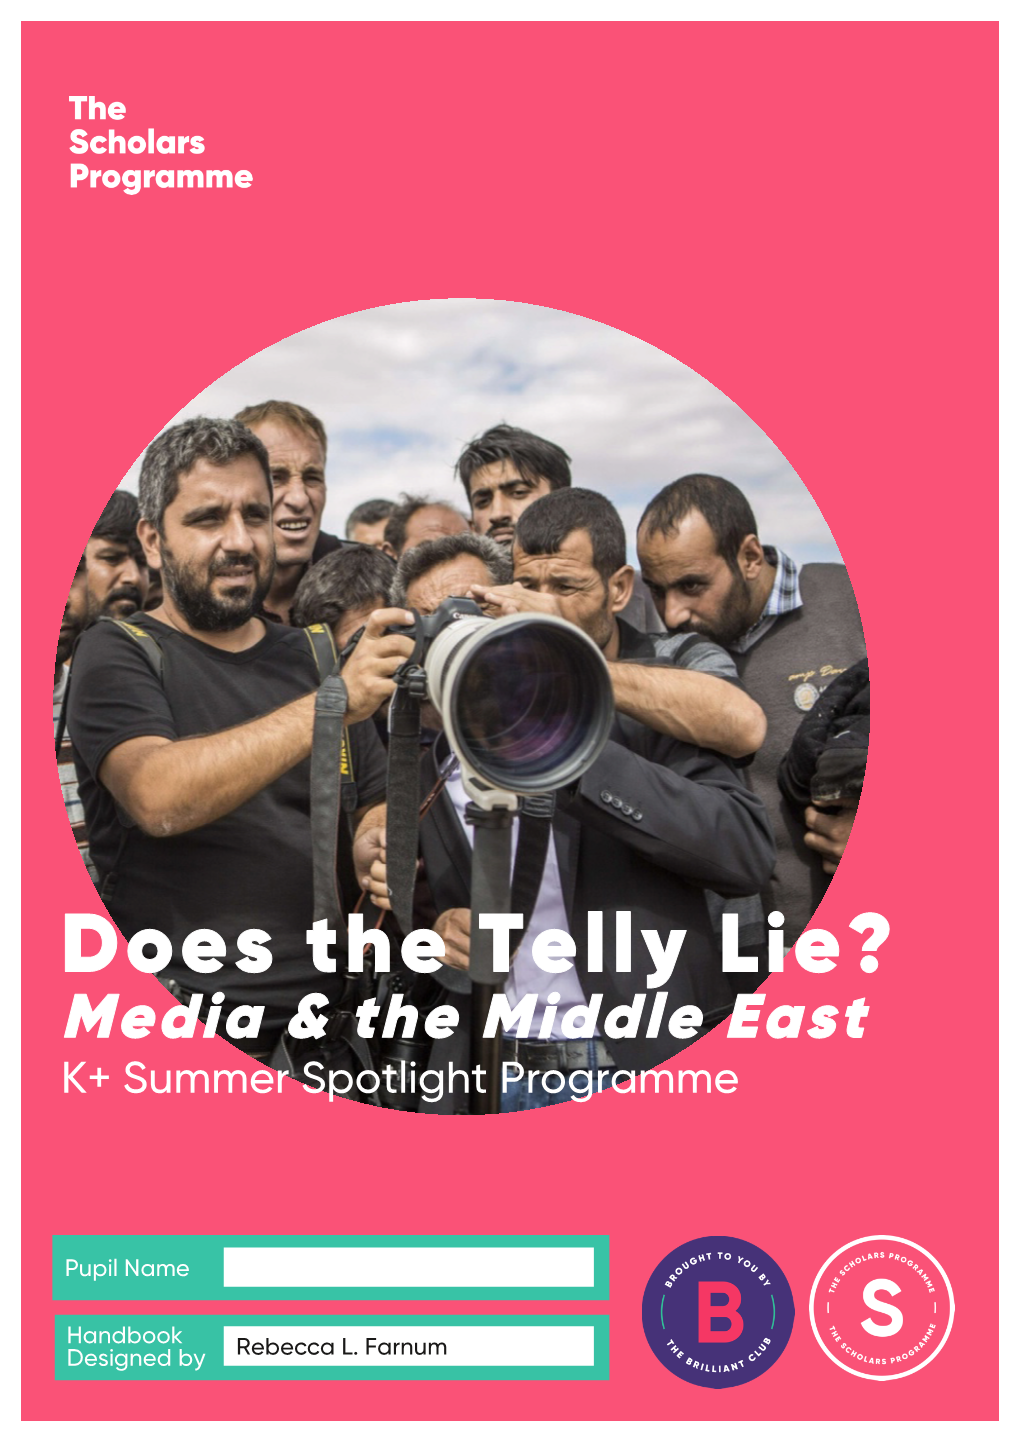 Does the Telly Lie? Media & the Middle East K+ Summer Spotlight Programme